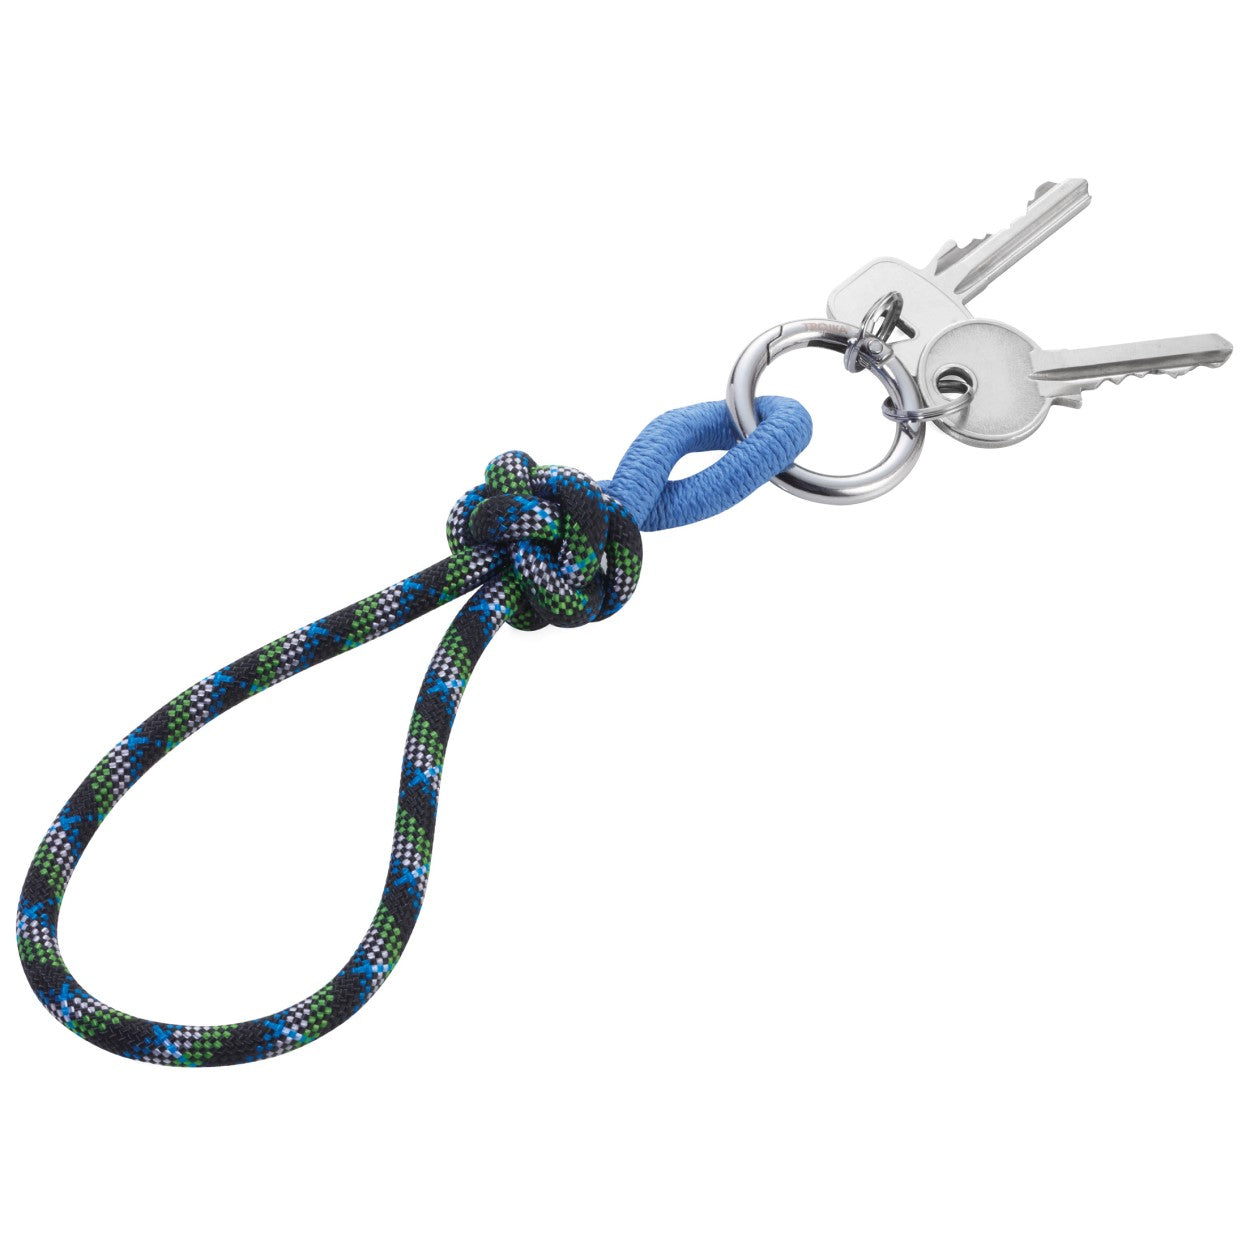 TROIKA Keyring Sail Rope with Decorative Knot CORDULA – Blue and Green